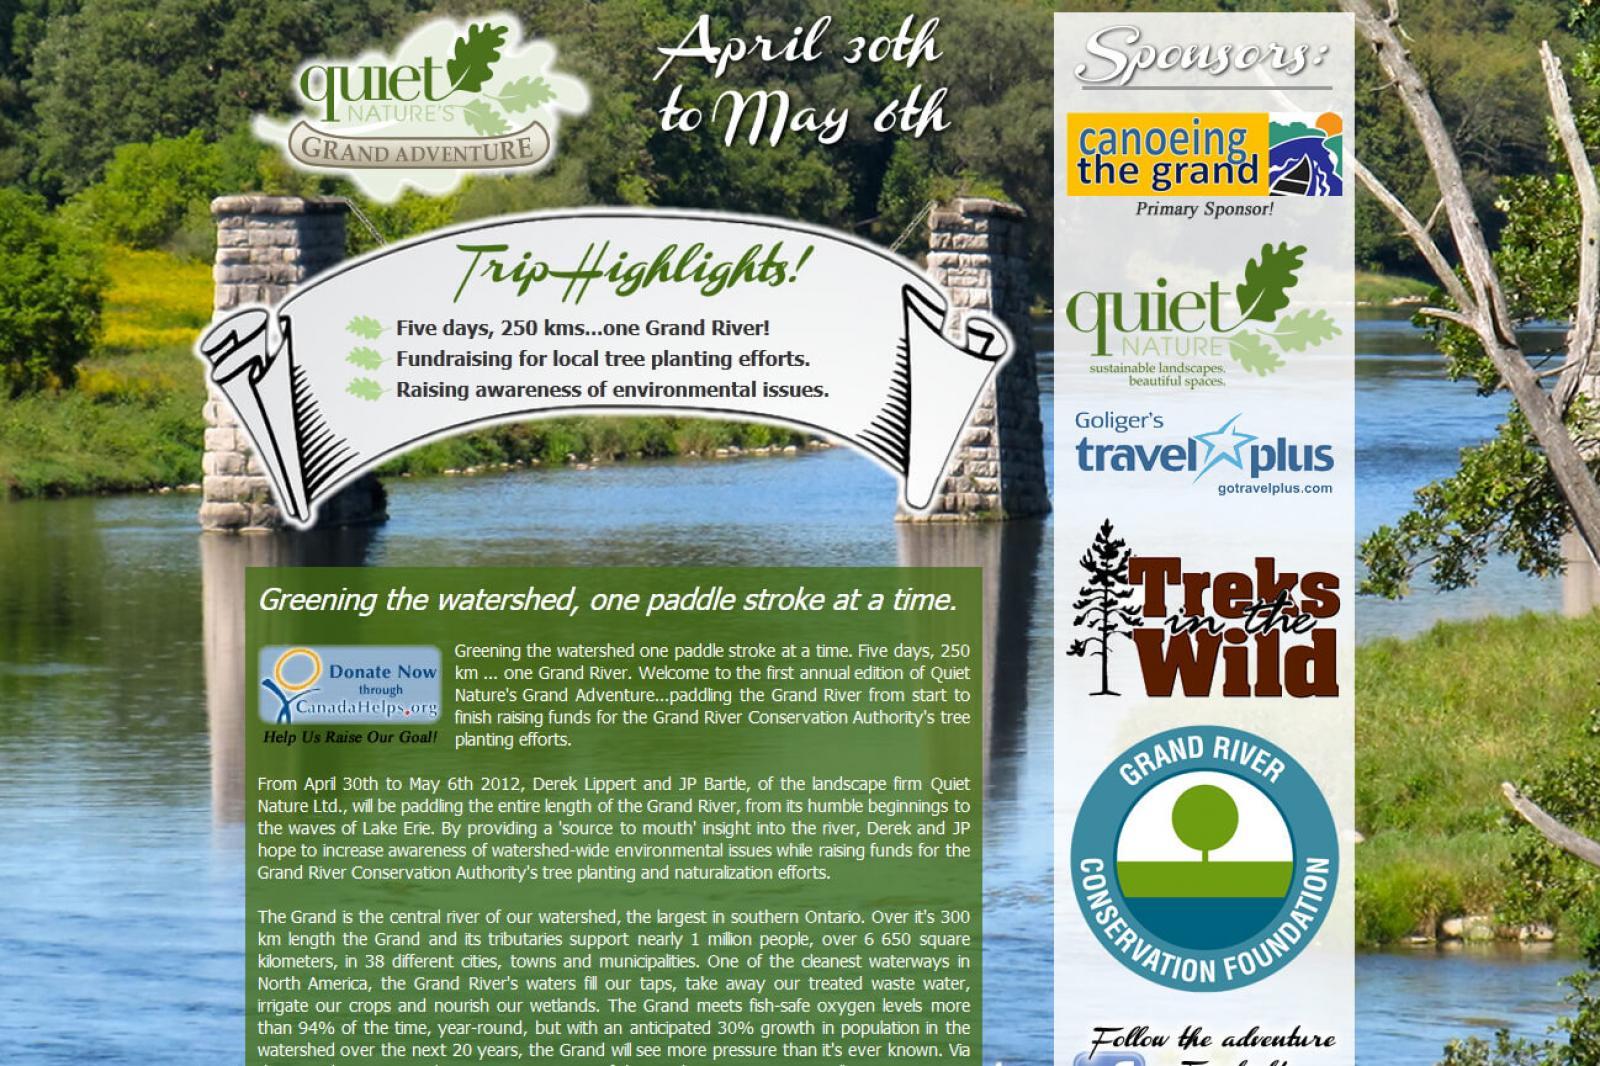 Quiet Nature’s Grand Adventure website has lots of information and the opportunity to pledge towards fund-raising canoe trip down the Grand River.